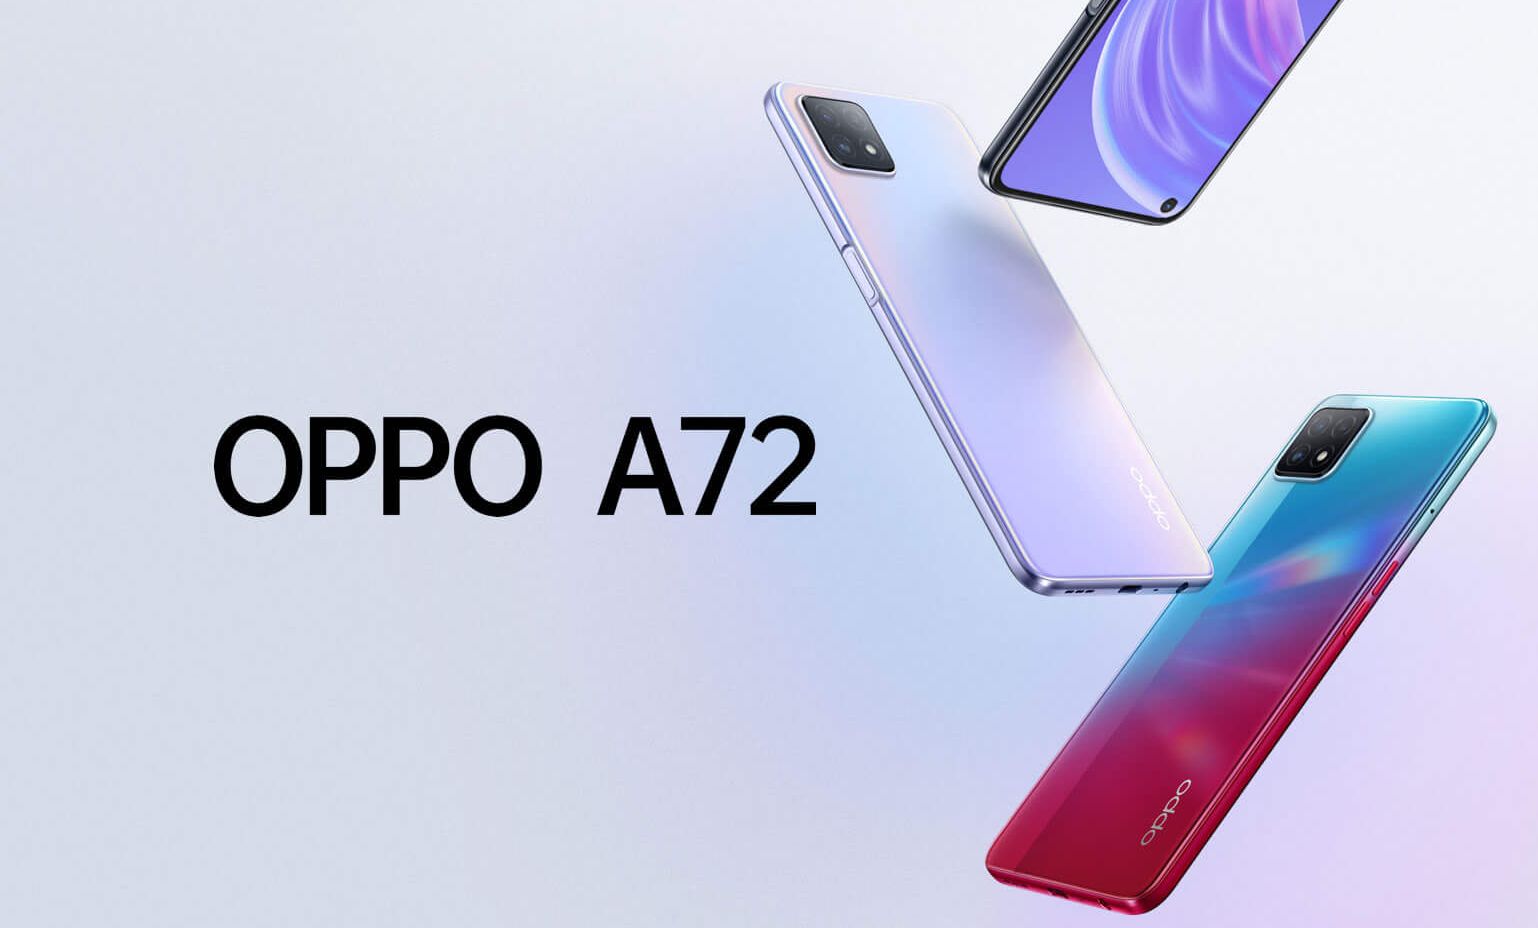 OPPO A72 5G goes on sale in China as the first Dimensity 720 powered phone